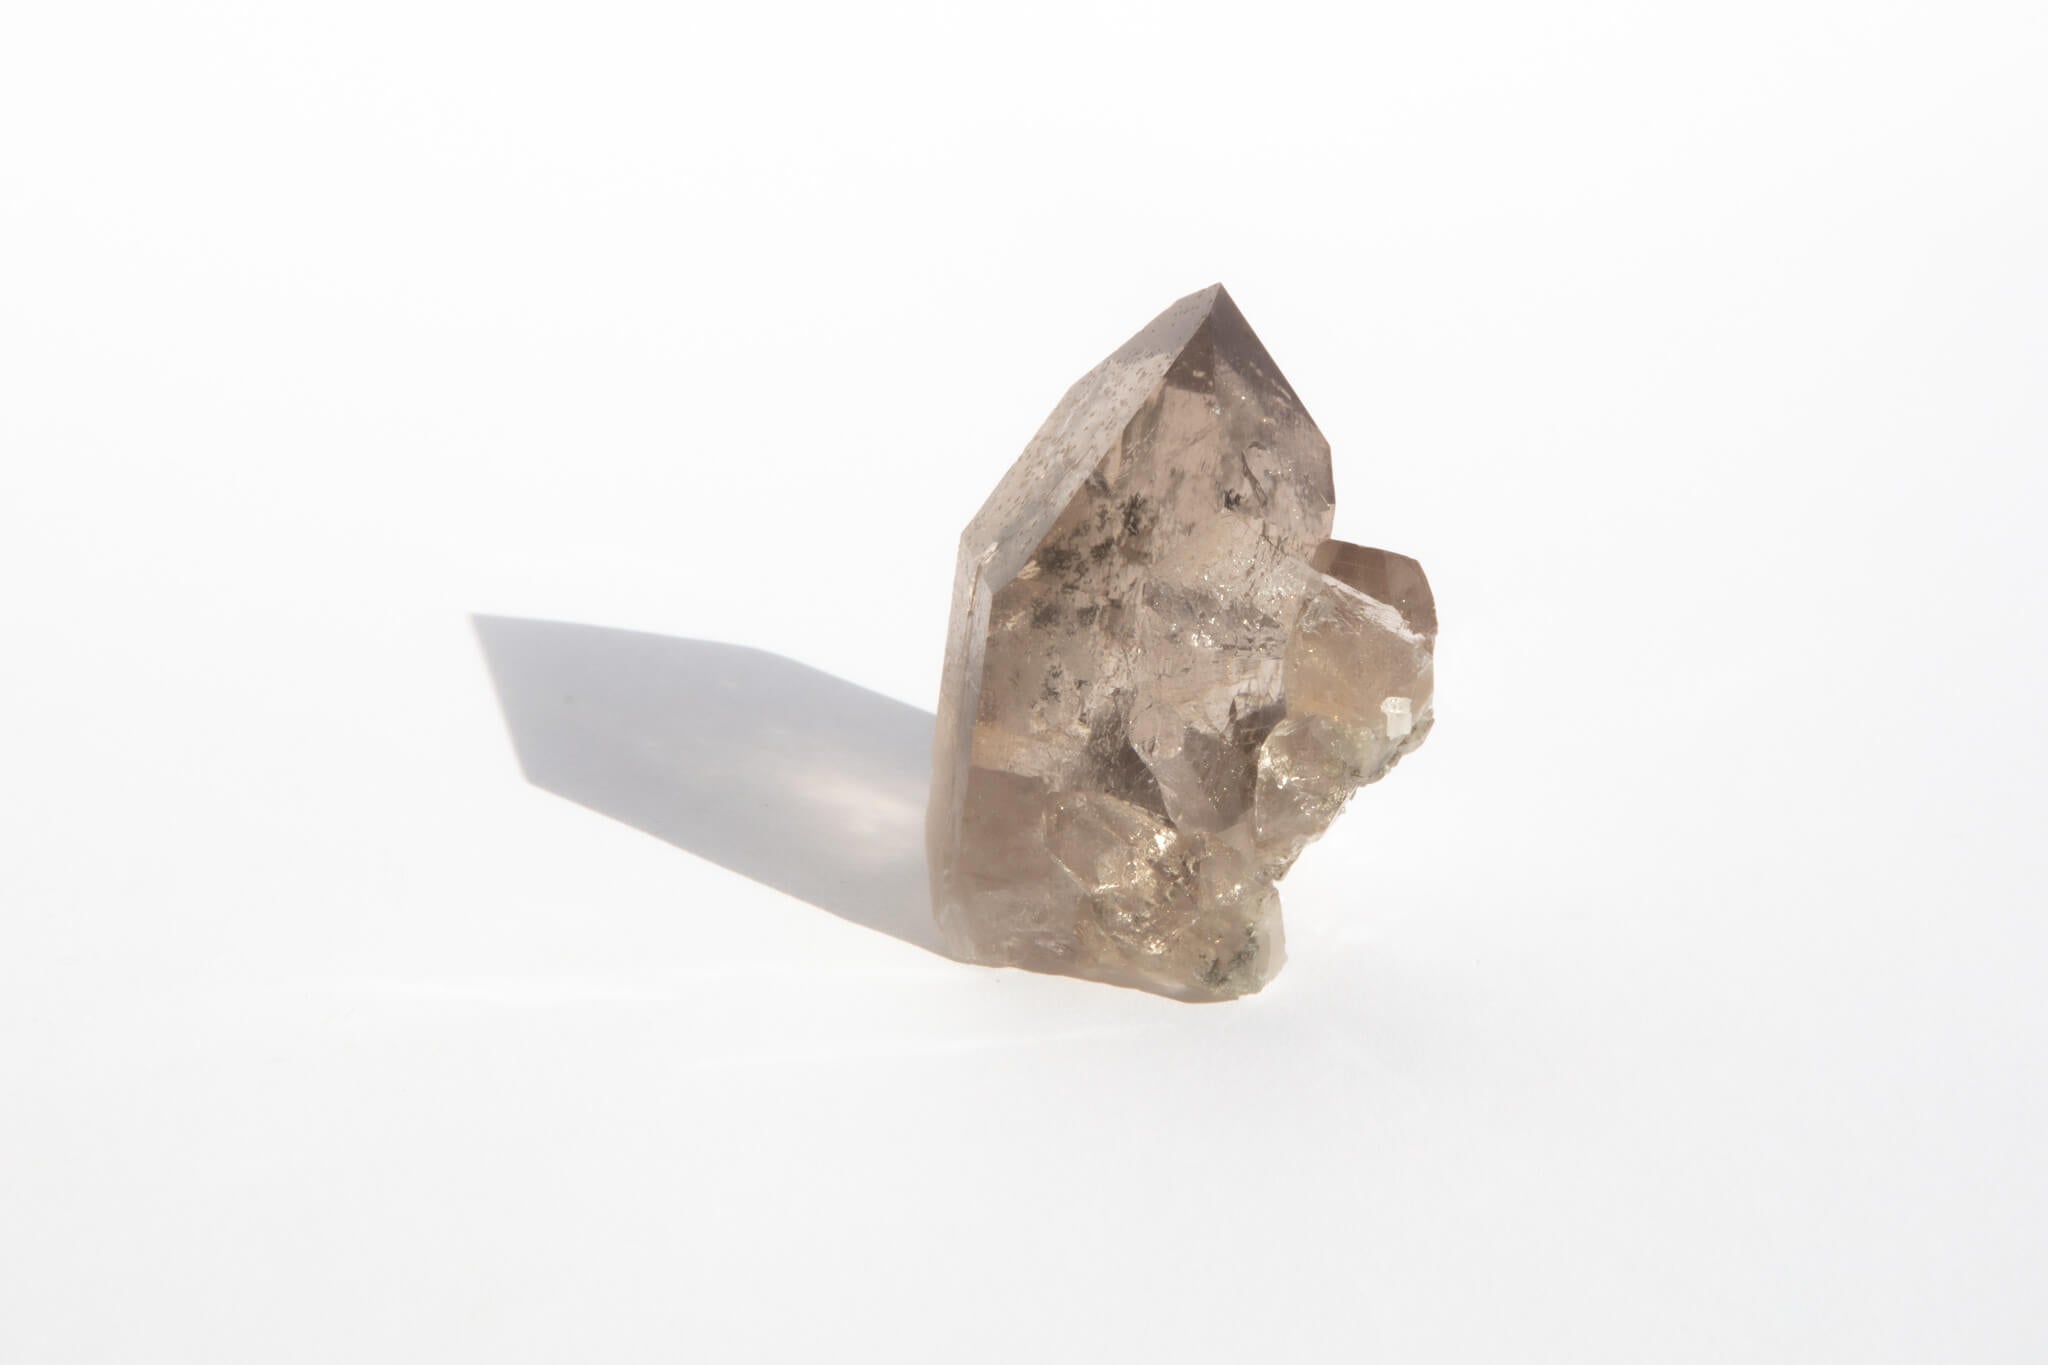 3: 1.94 x 2.47 x 1.57 inches - 102 g - $280 | Photos do not do this crystal justice. This one is a soft but powerful crystal.